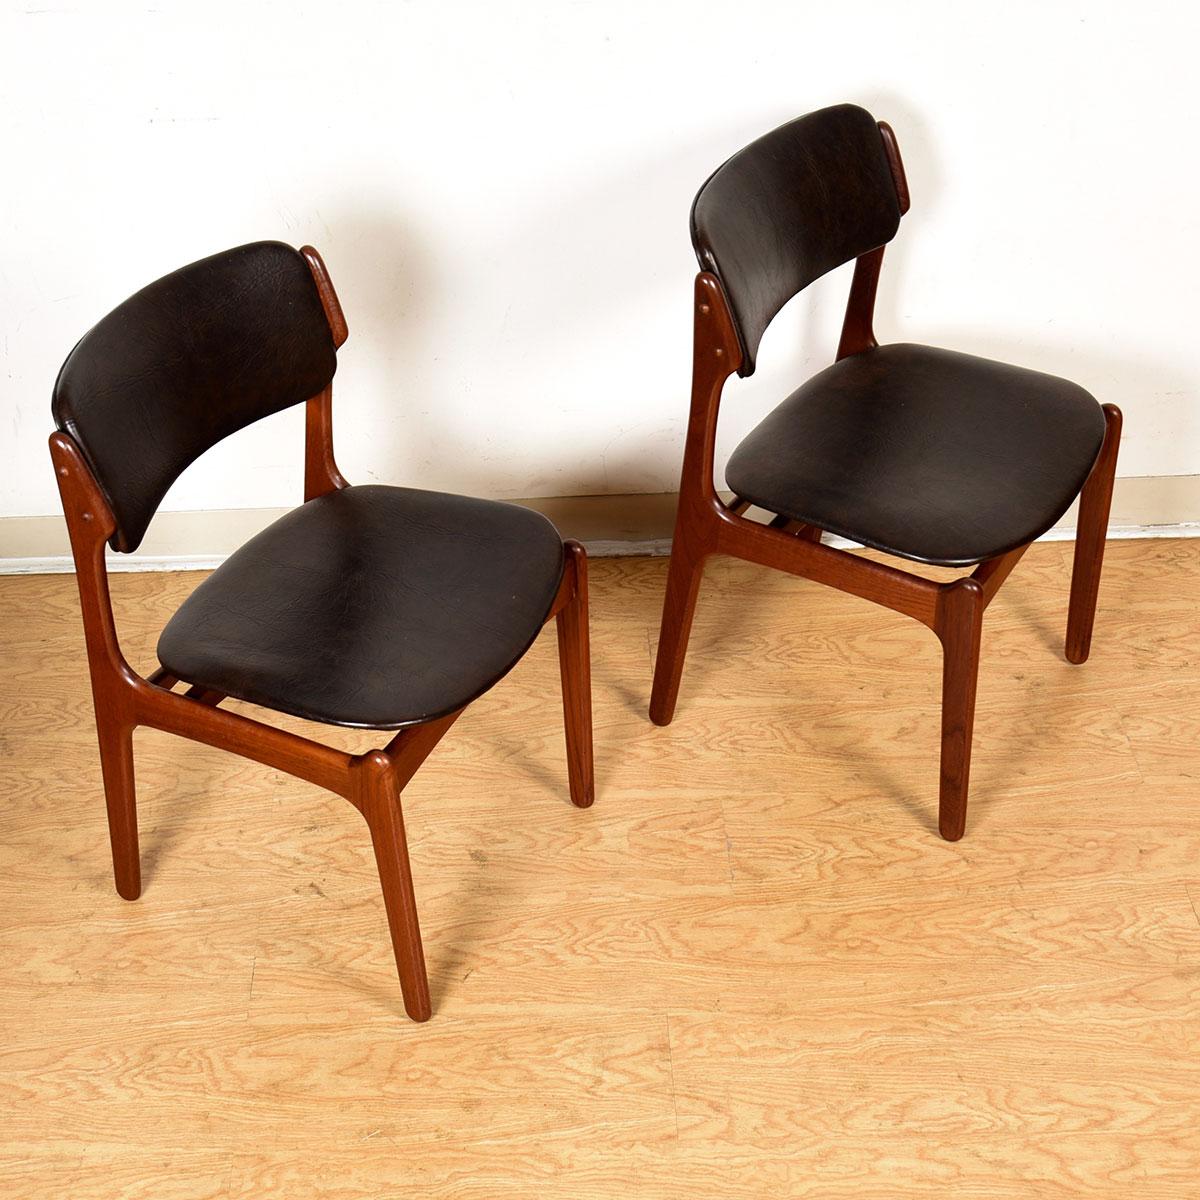 Pair of Danish Teak Dining Chairs in Chocolate Brown by Erik Buch In Excellent Condition For Sale In Kensington, MD